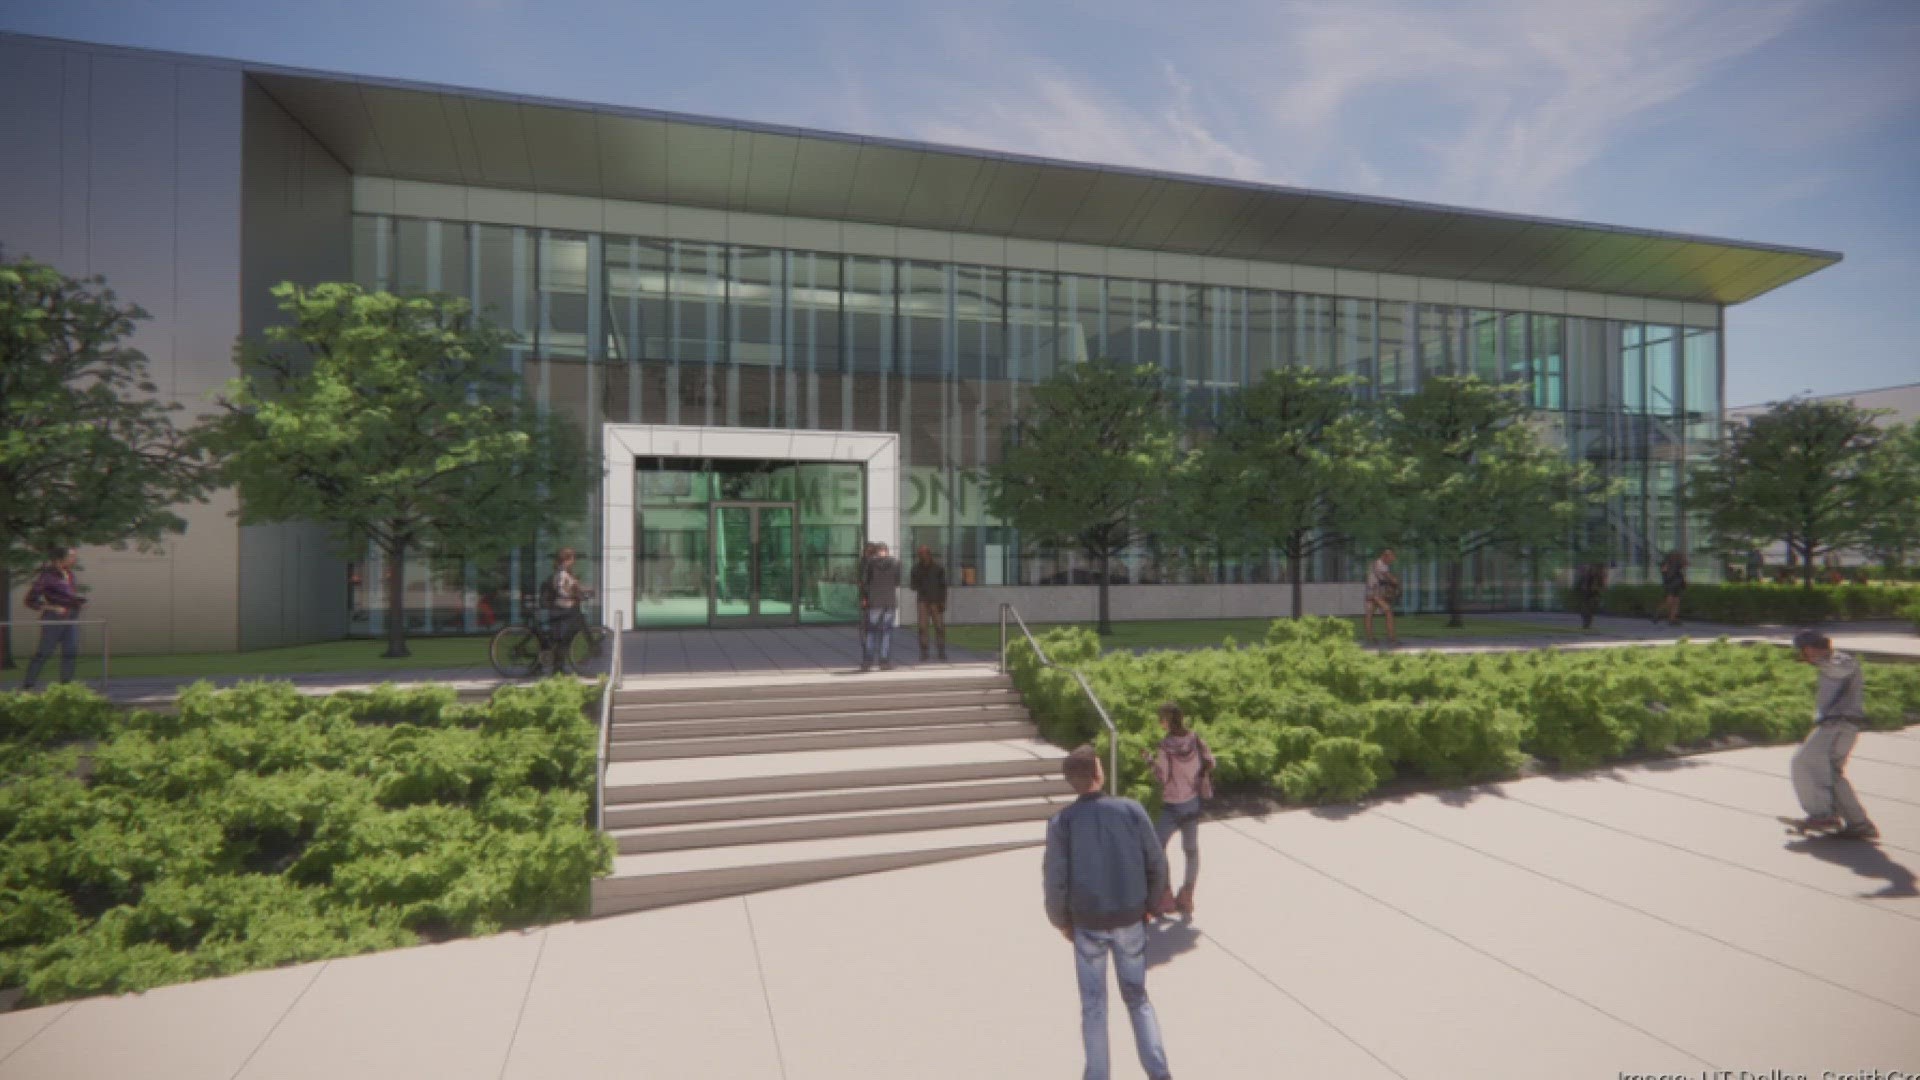 The university has plans to transform an existing building into an esports center with a $13 million renovation.